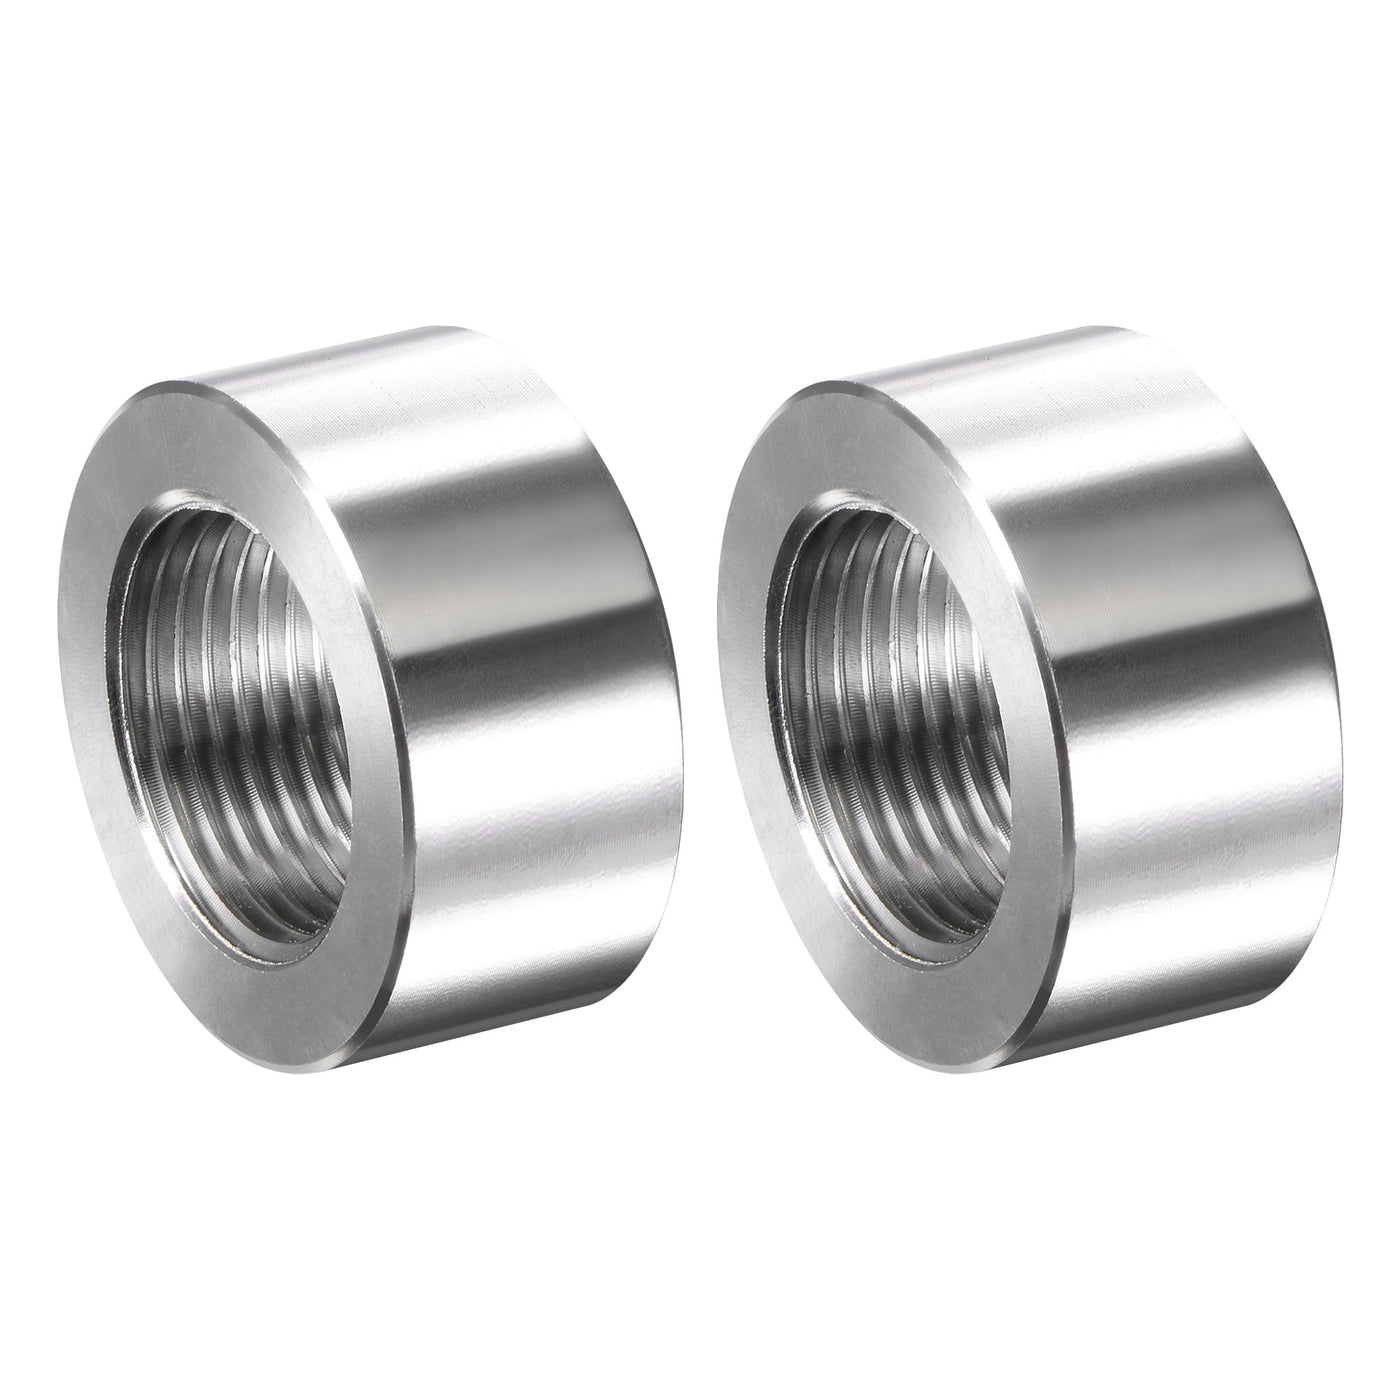 Uxcell Uxcell G3/4 Weld On Bung Female Nut Threaded - Stainless Steel  Insert Weldable 2pcs